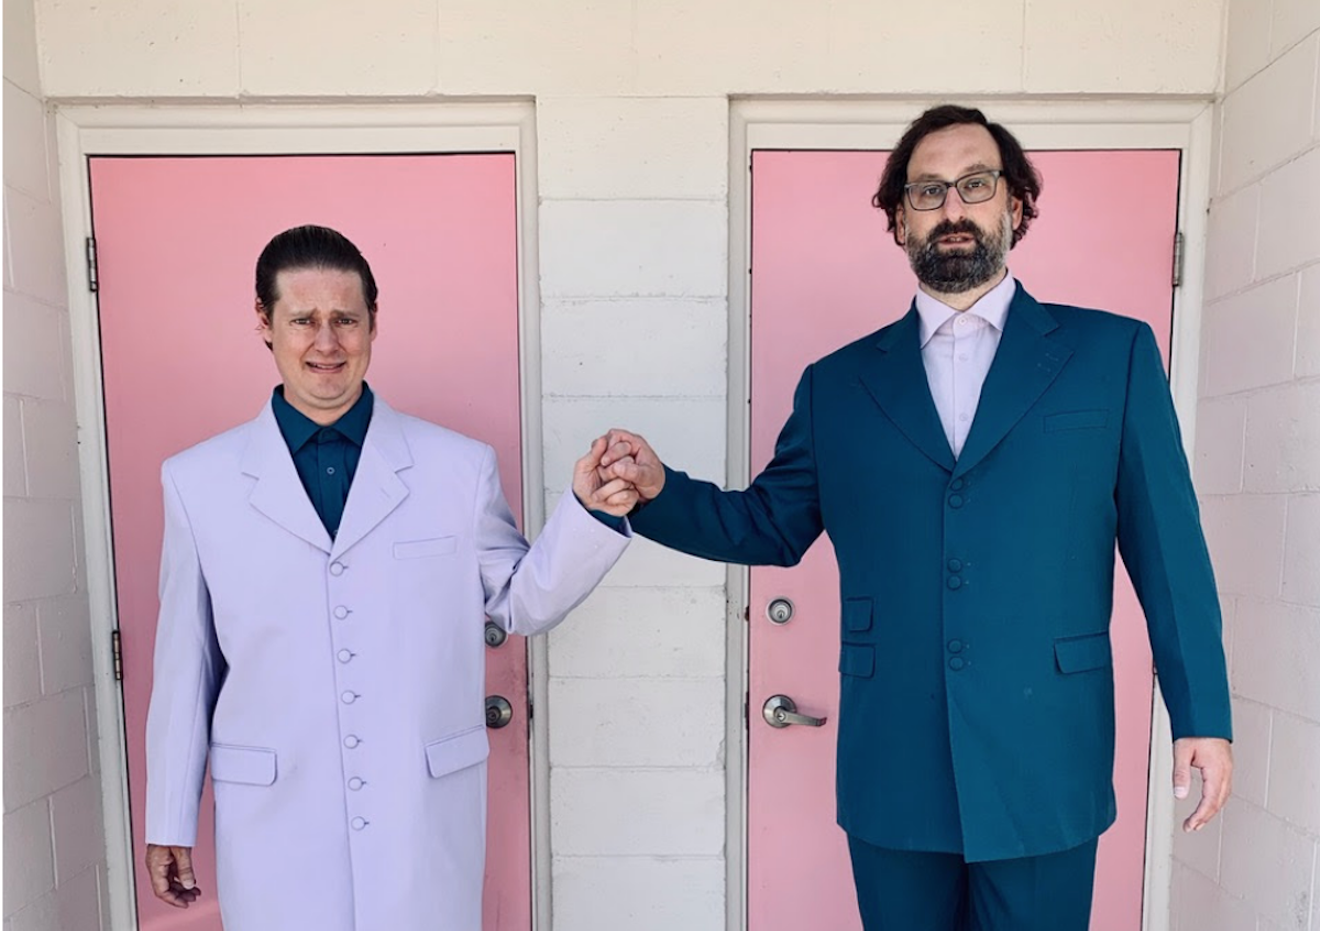 Tim and Eric: still doing a great job with their awesome shows.